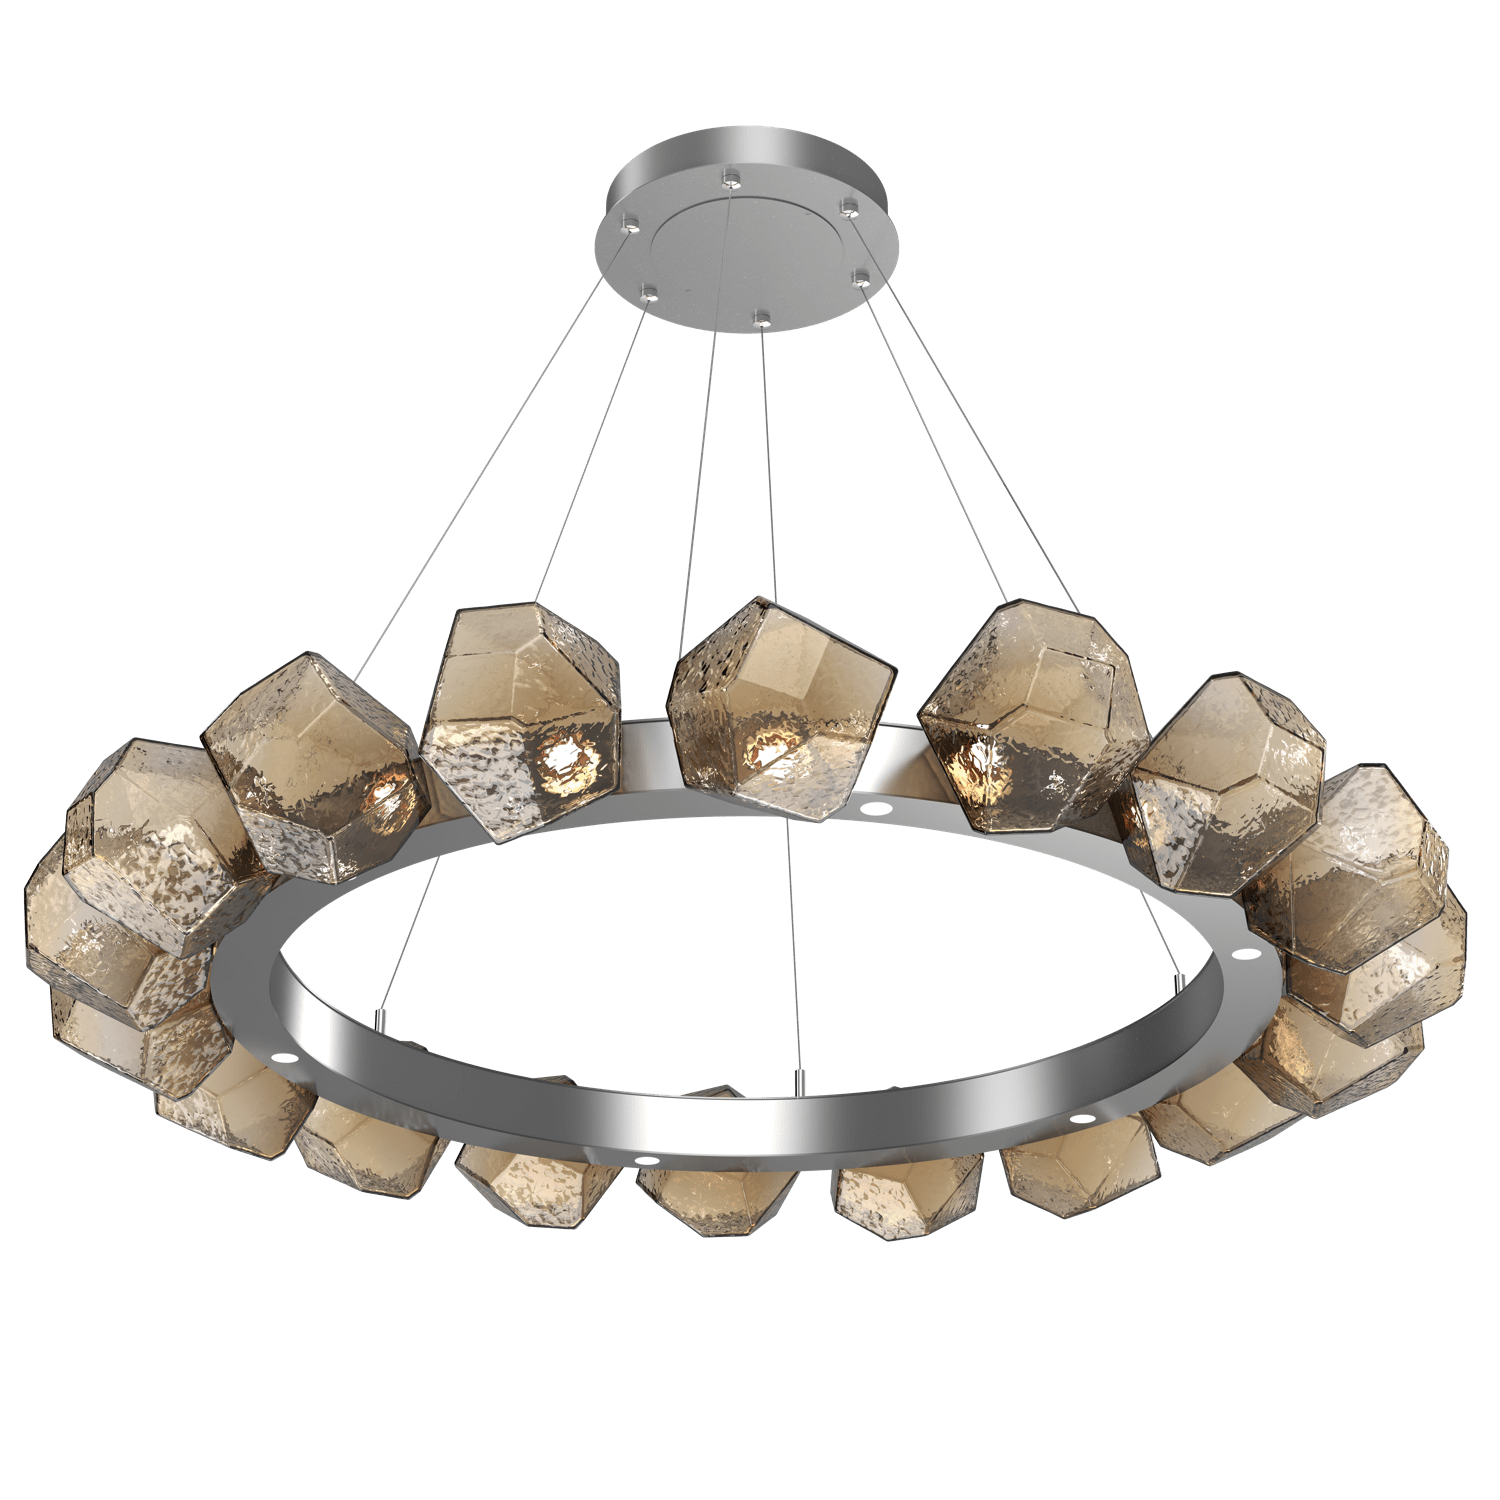 CHB0039-48-CS-B-Hammerton-Studio-Gem-48-inch-radial-ring-chandelier-with-classic-silver-finish-and-bronze-blown-glass-shades-and-LED-lamping